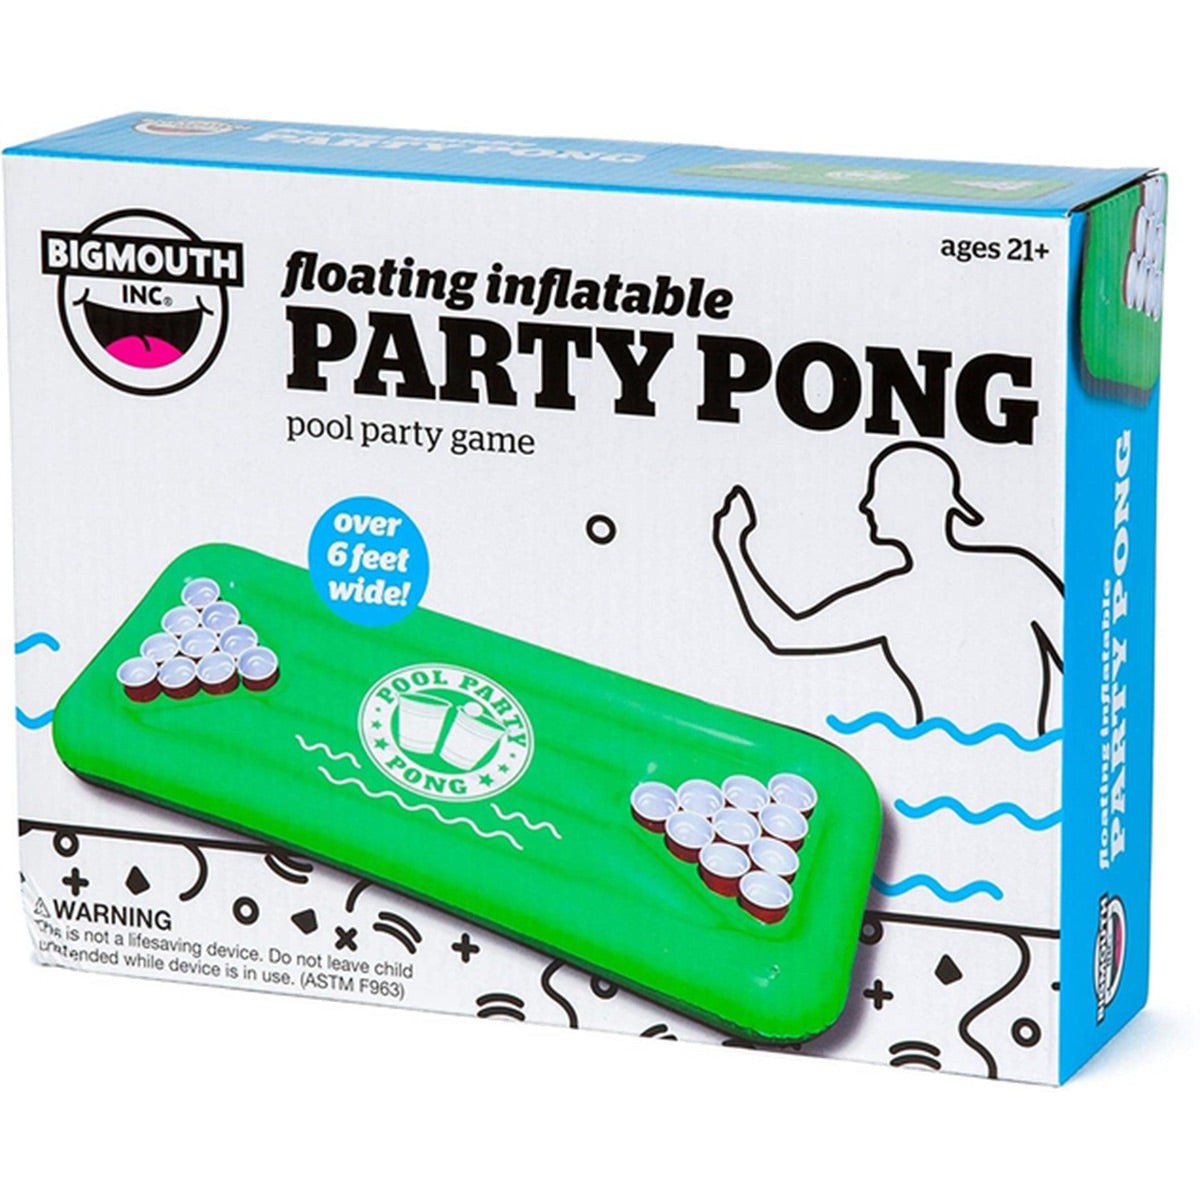 STORTZ TOYS Summer Pool Party Pong Float 817742020964